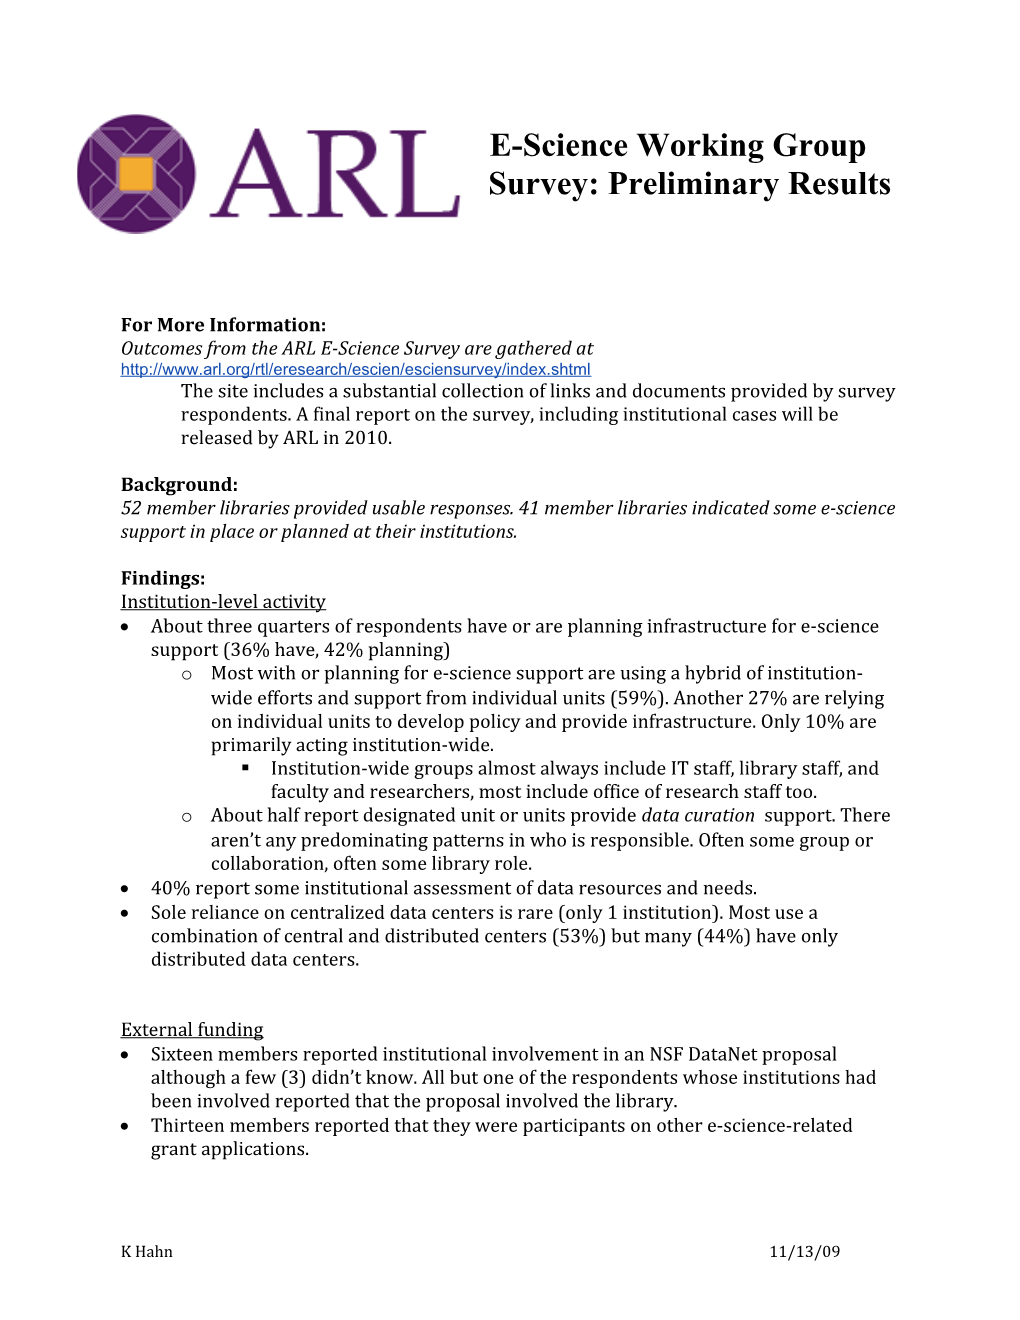 Outcomes from the ARL E-Science Survey Are Gathered At